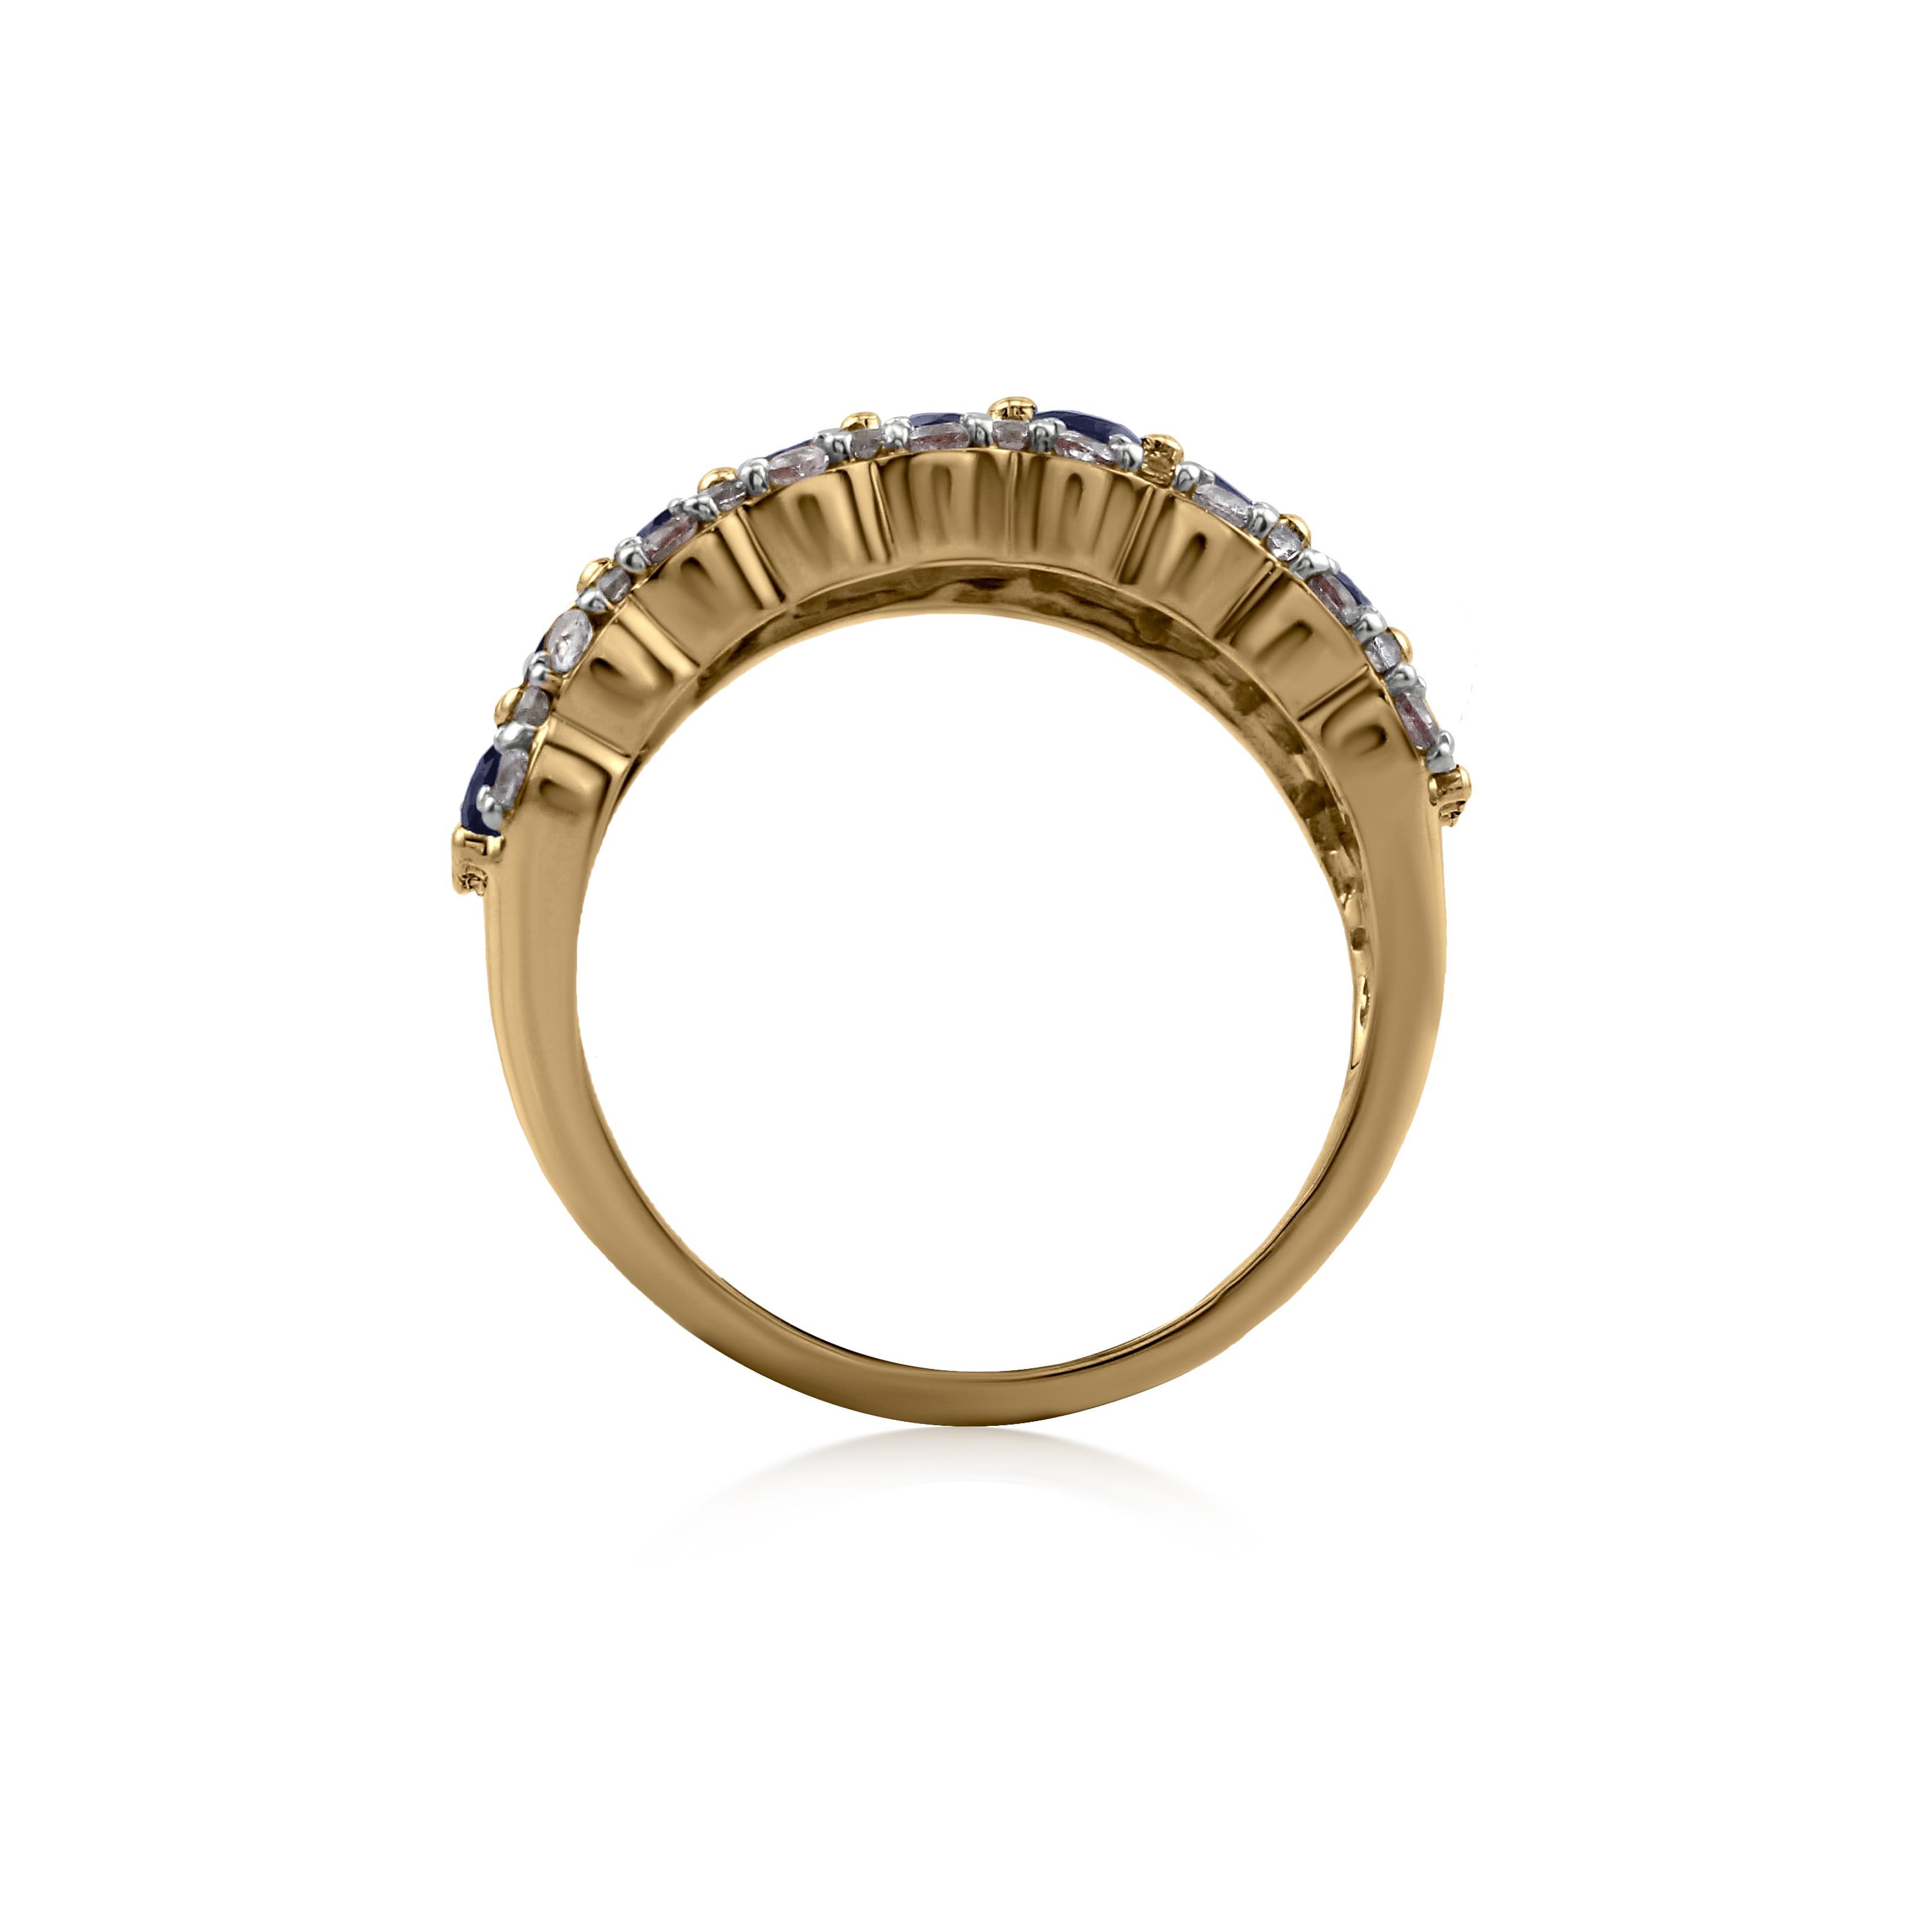 Gemistry 4.15 Ct. T.W Double-Row Blue Sapphire Eternity Band Ring in 14K Gold 4